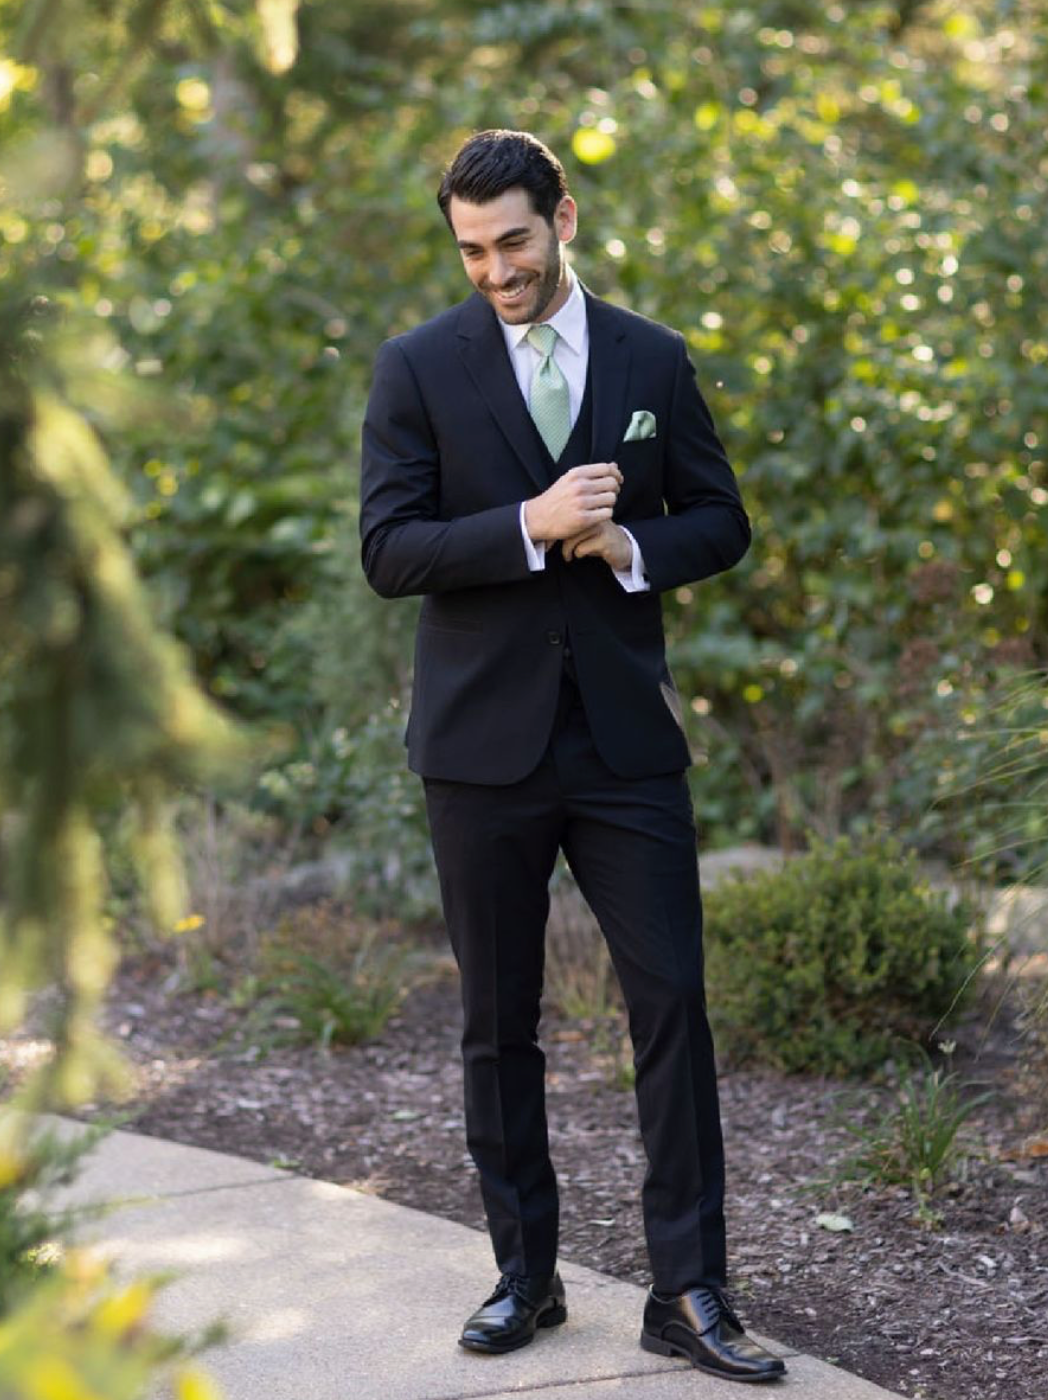 Model wearing a tuxedos suit